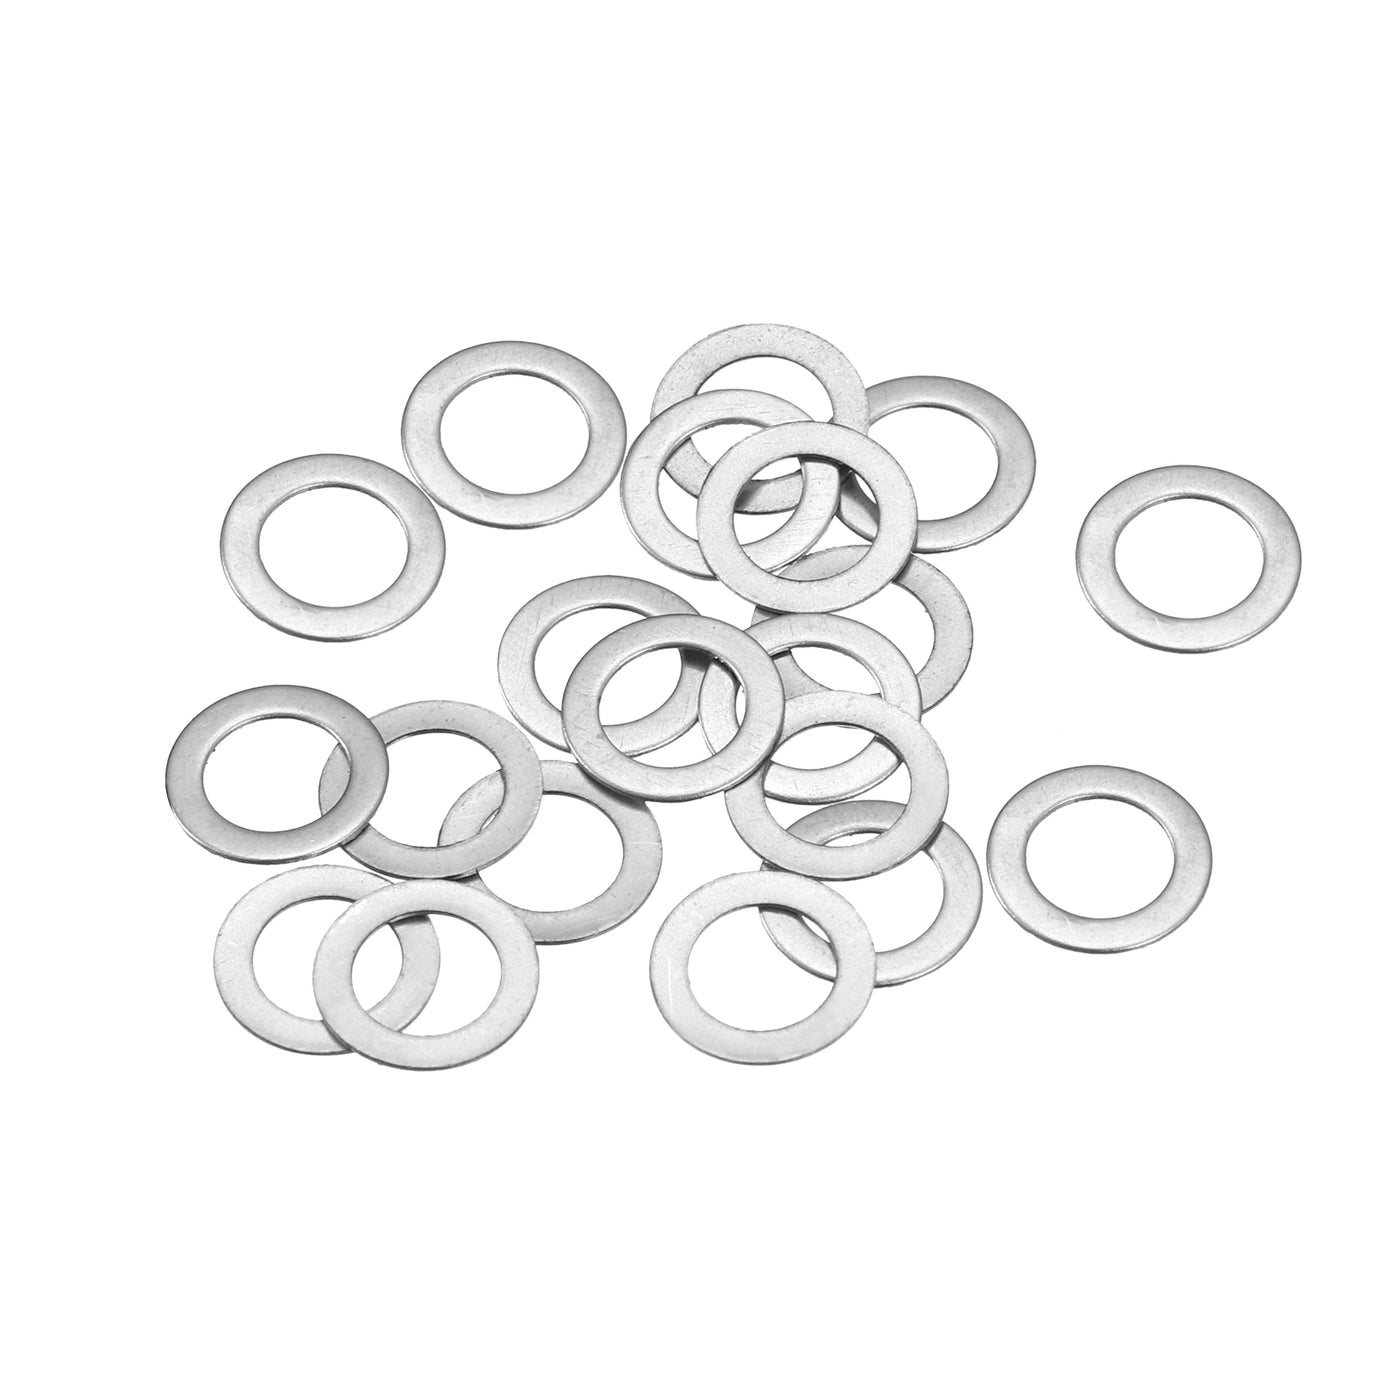 uxcell Uxcell M5 304 Stainless Steel Flat Washers, 20pcs 5x8x0.3mm Ultra Thin Flat Spacers